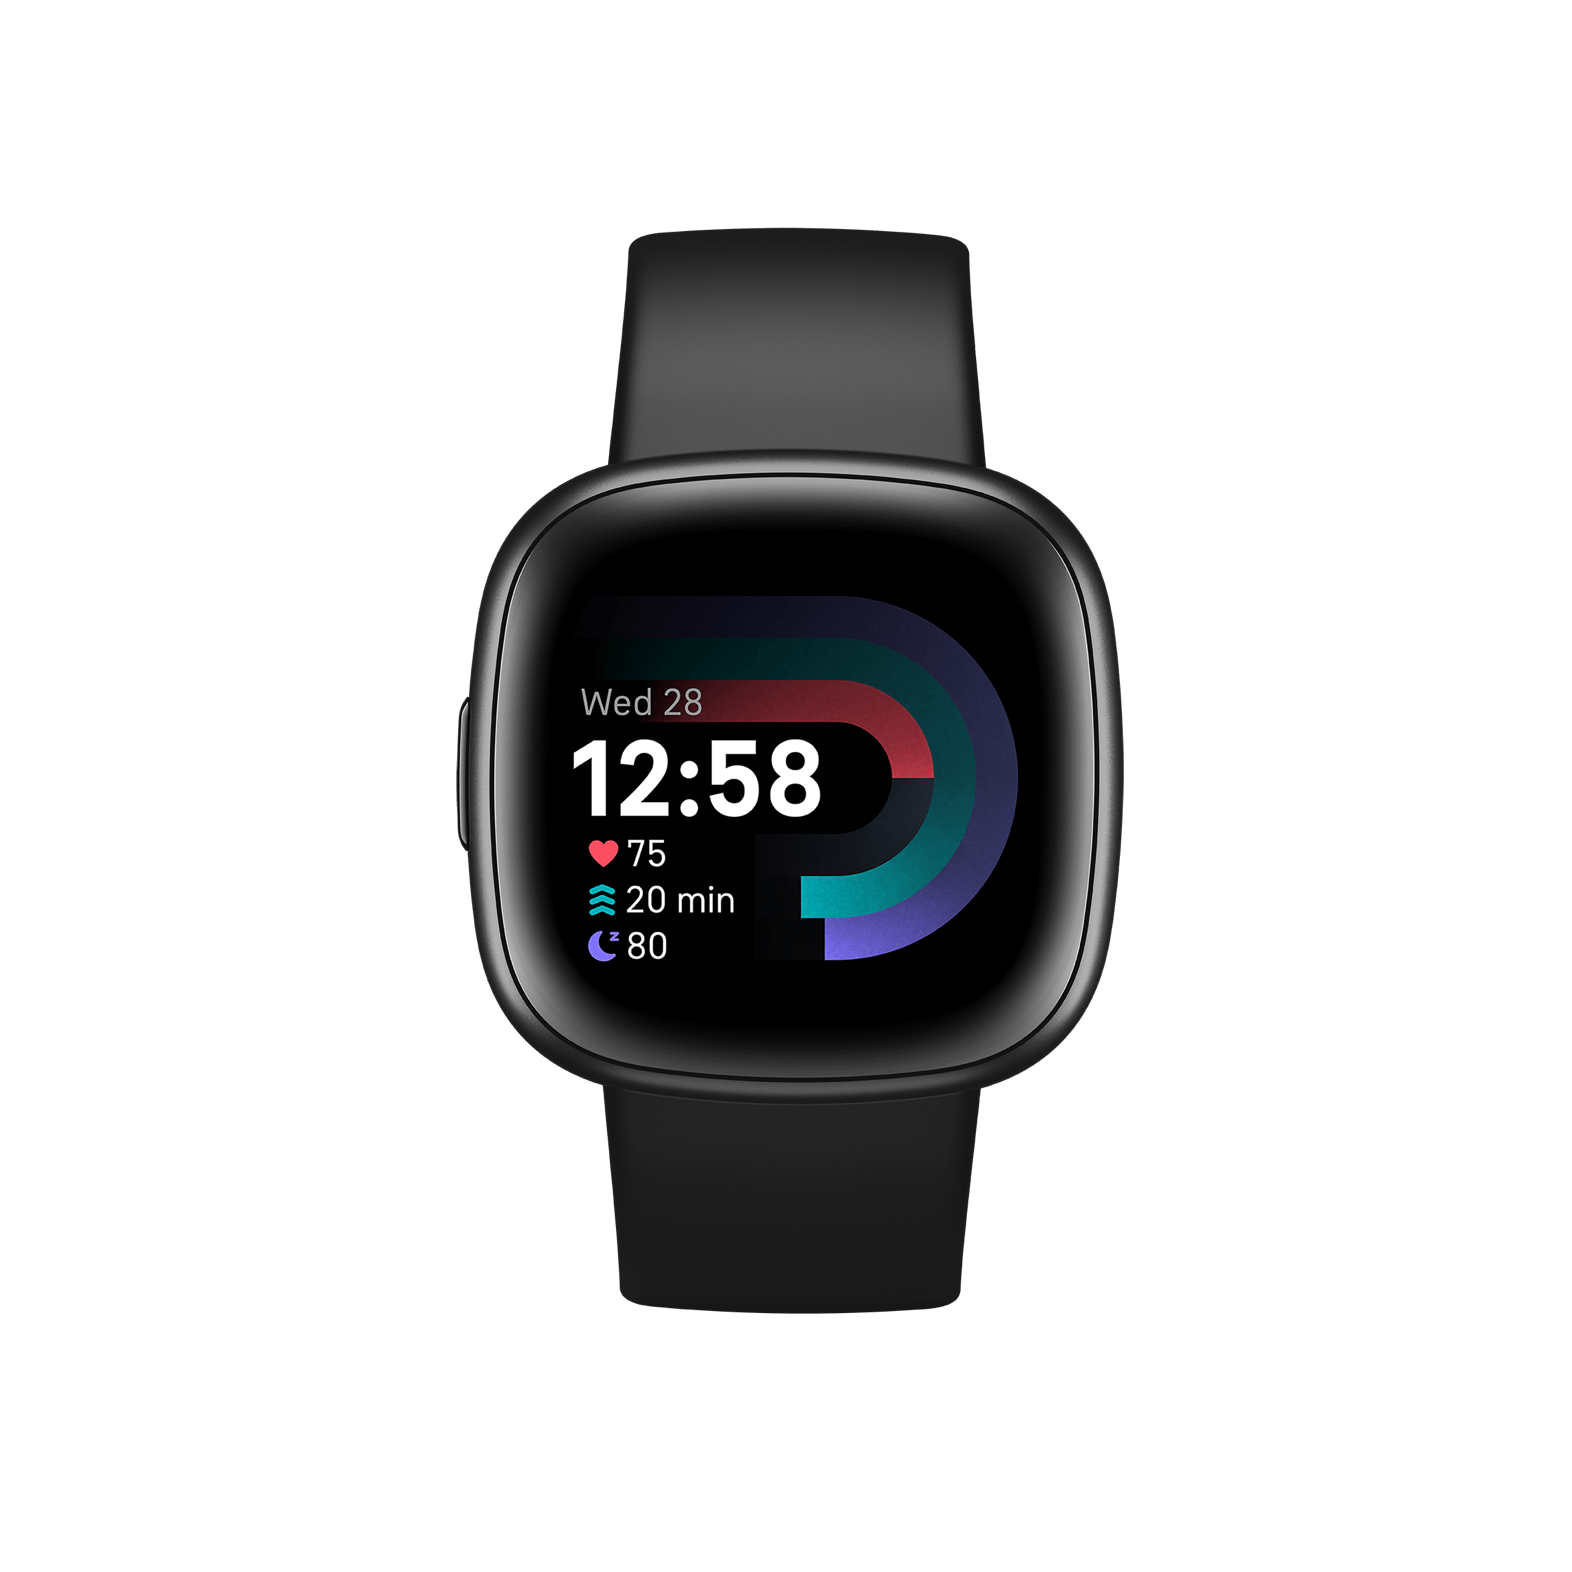 Fitbit Versa Review - Fitbit Smartwatch For Running and Workouts